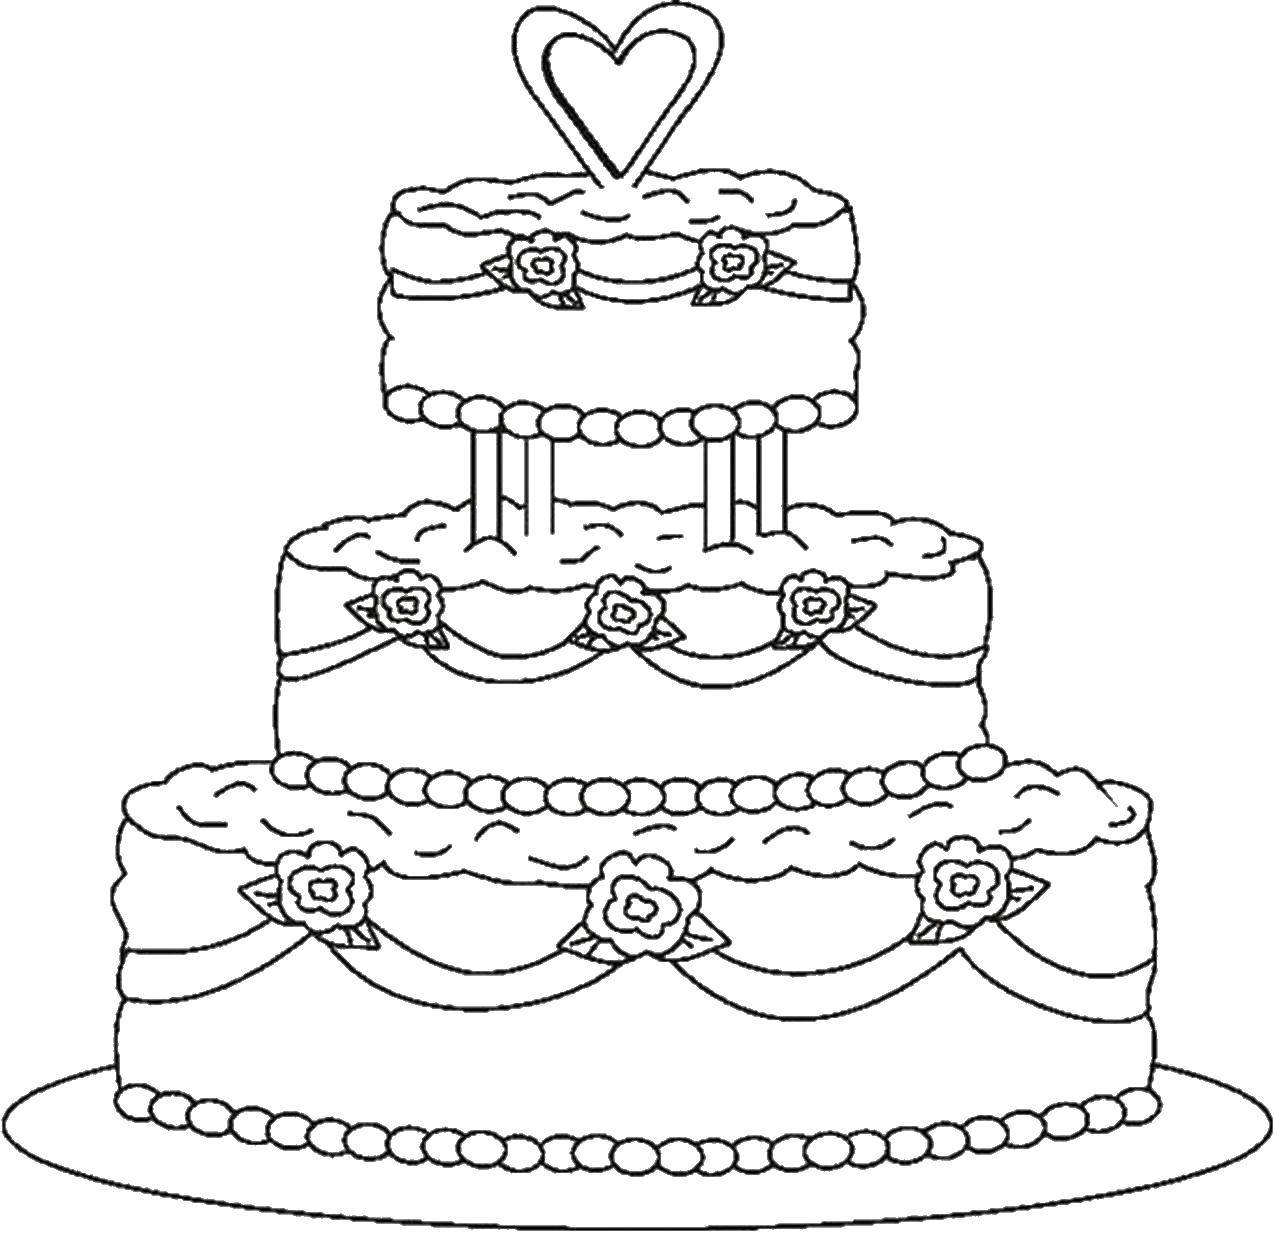 Coloring Wedding cake. Category cakes. Tags:  cakes, wedding, sweet.